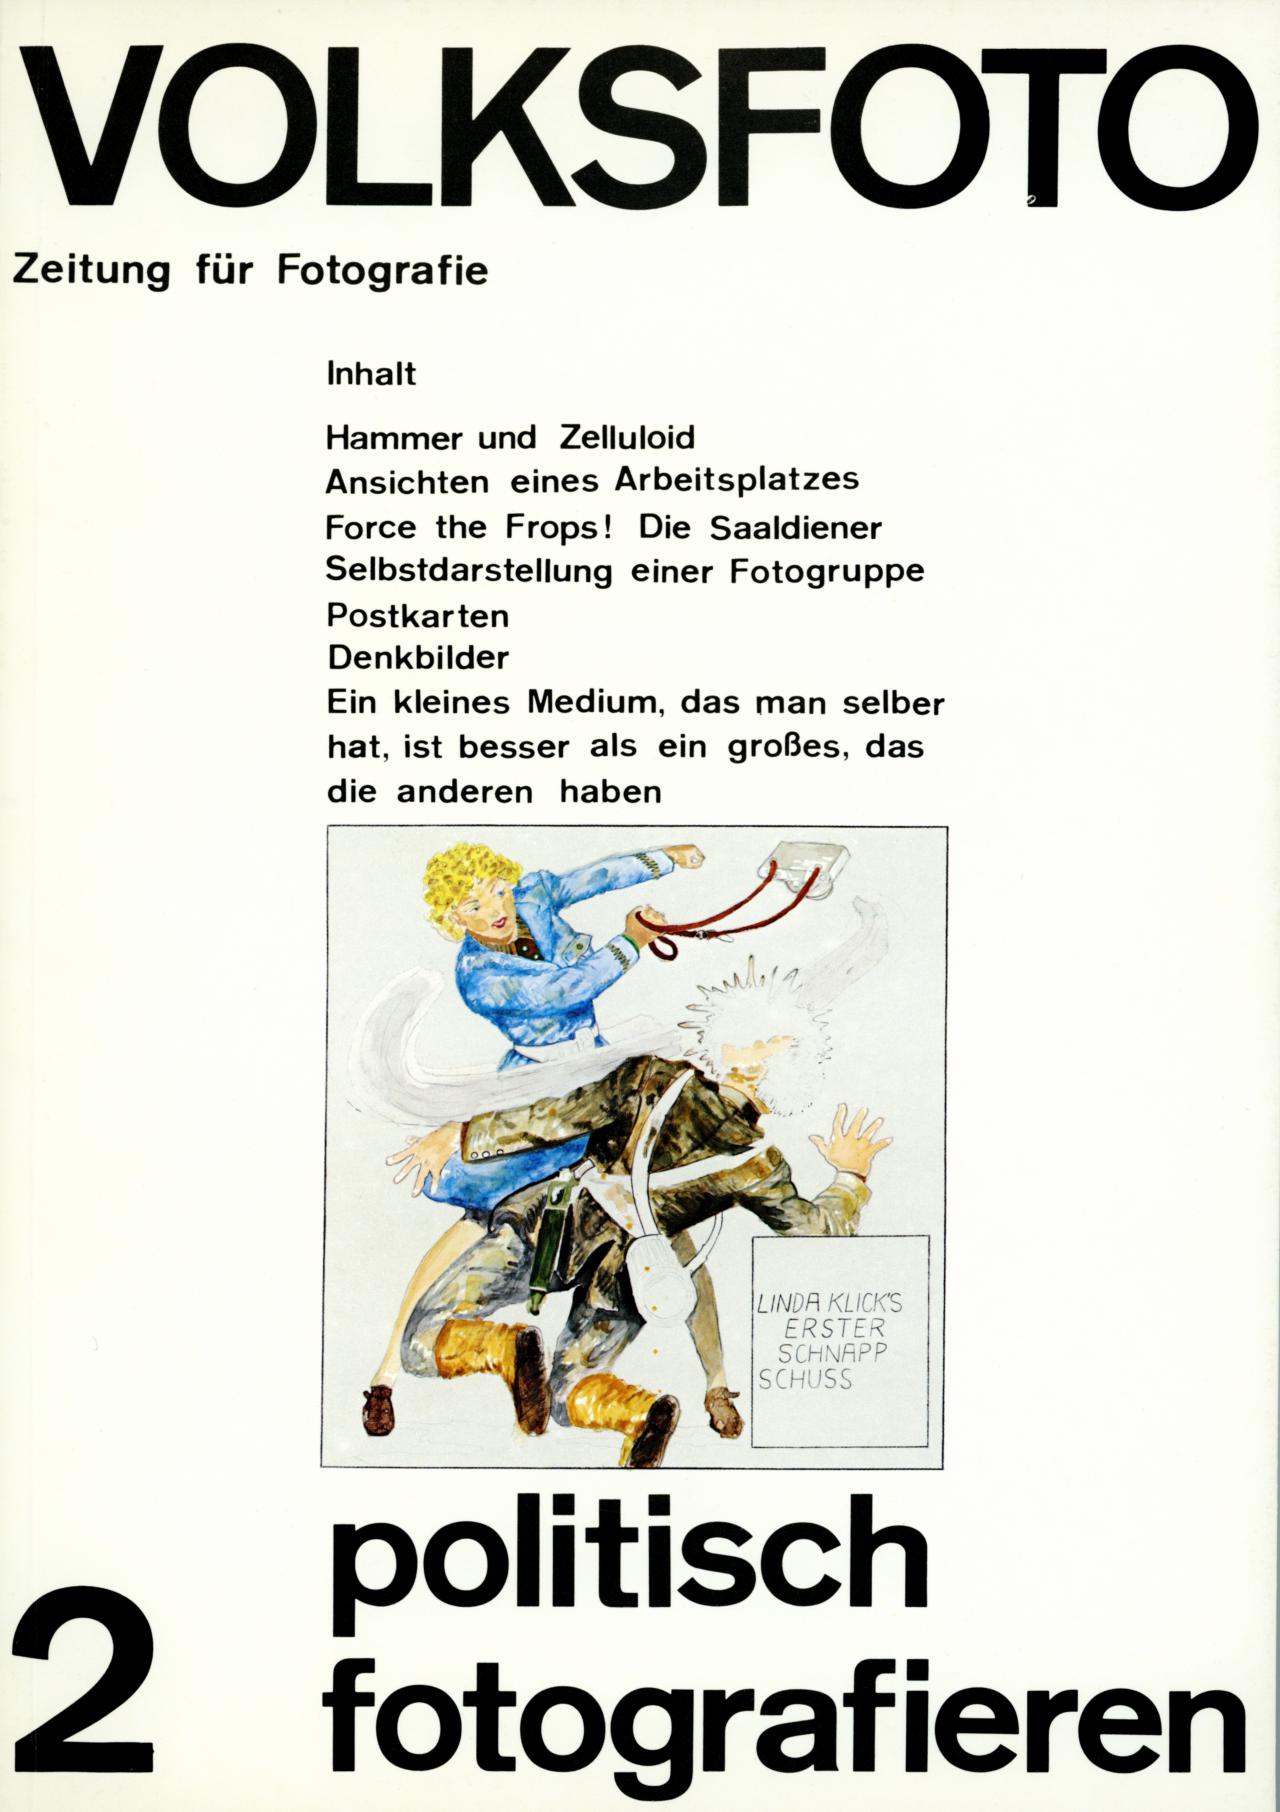 Andreas Seltzer and Dieter Hacker (ed.), folk photo. Newspaper for photography. Political Photography, No. 2, 7th Produzentengalerie, Berlin, 1977.